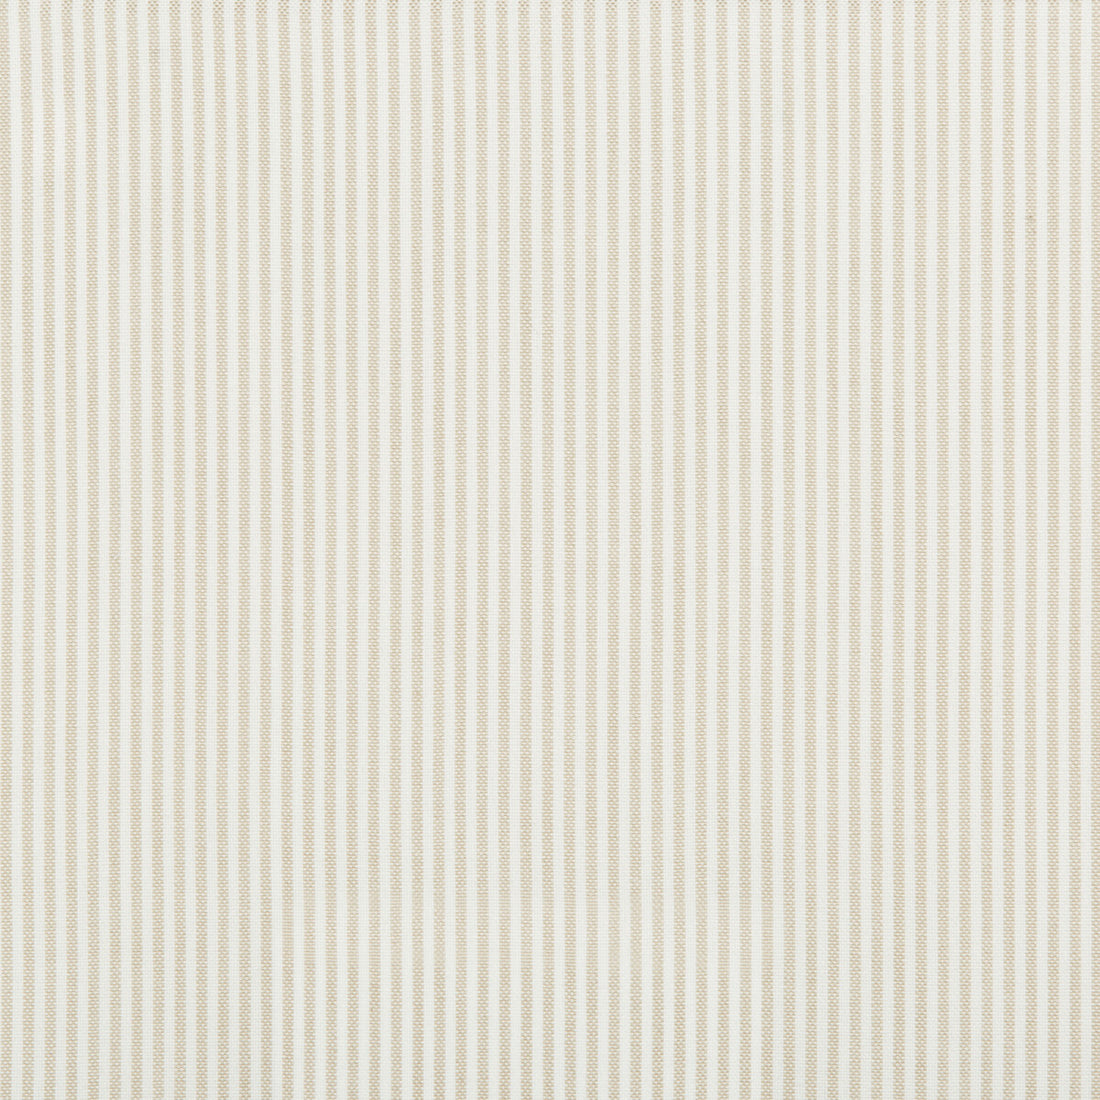 Kravet Basics fabric in 35374-16 color - pattern 35374.16.0 - by Kravet Basics in the Performance Indoor Outdoor collection